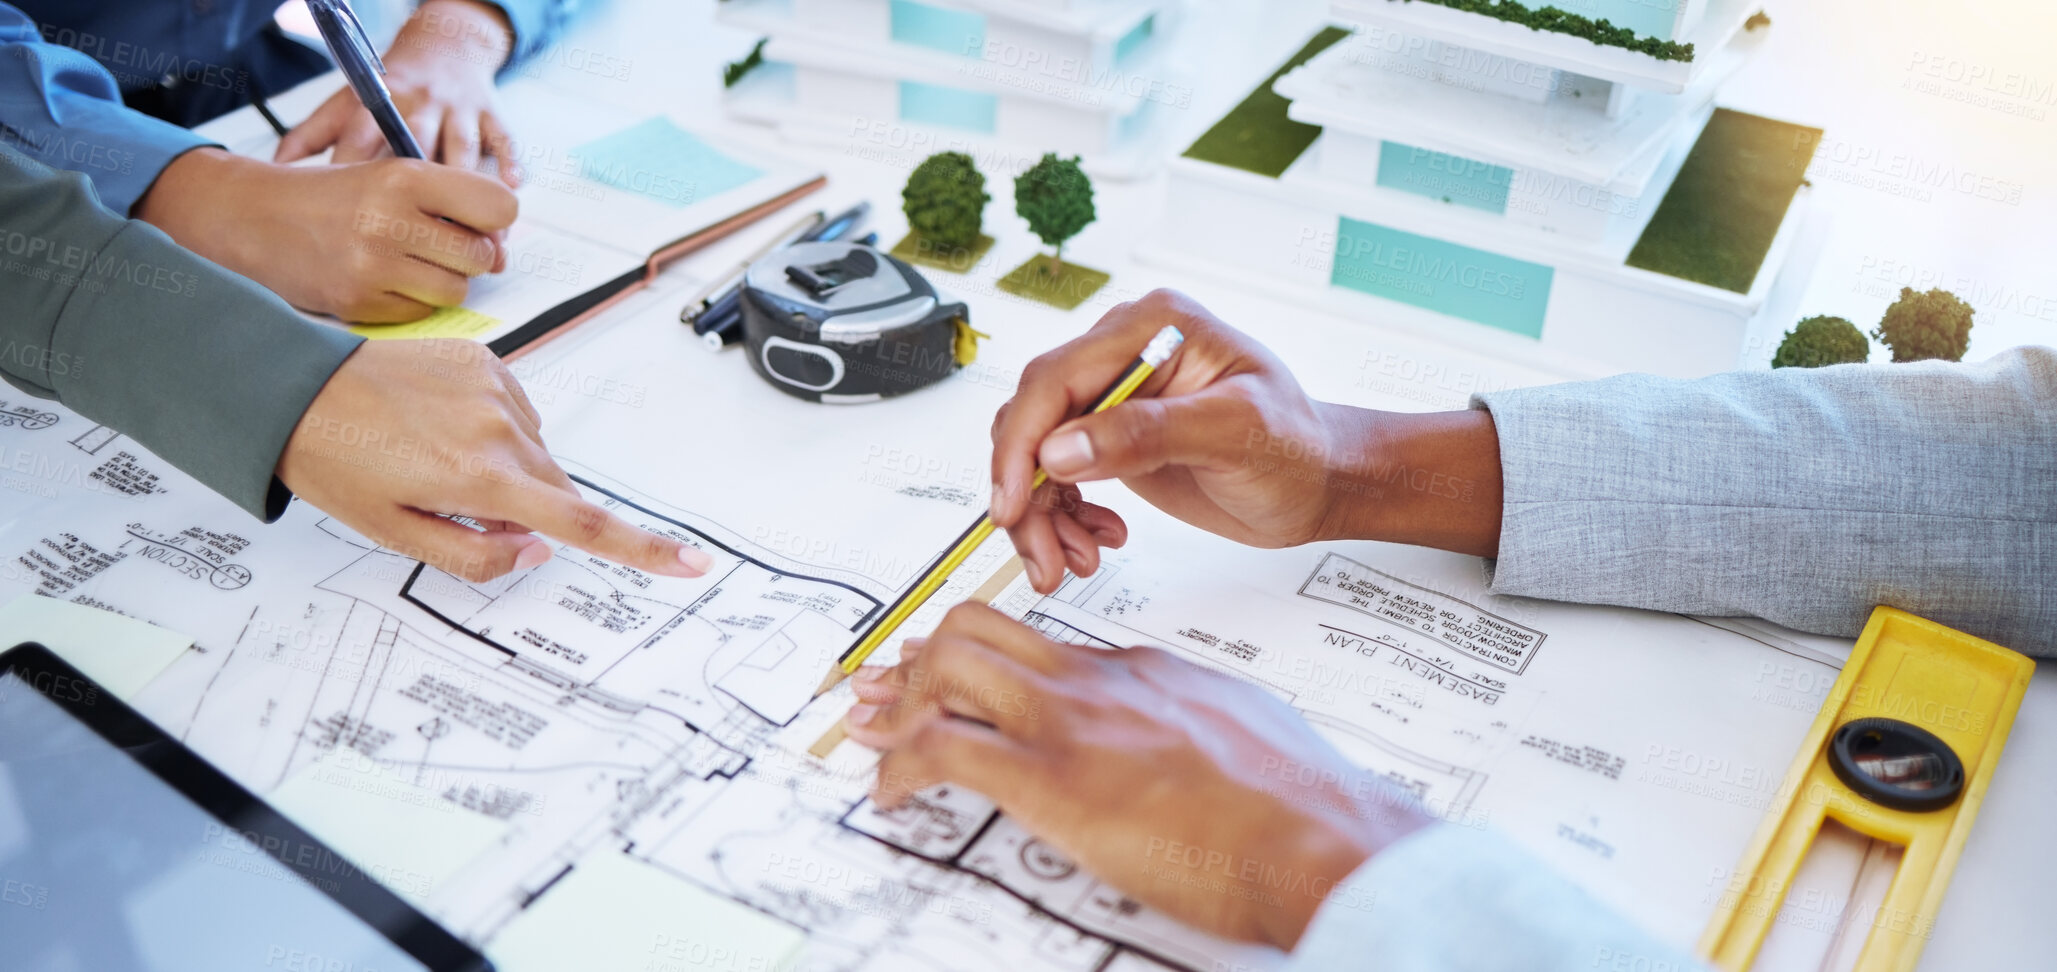 Buy stock photo Architect hands working on architecture design, blueprint or floor plan engineering with paper, pencil and planning in office. Business teamwork industry workers collaboration on project development